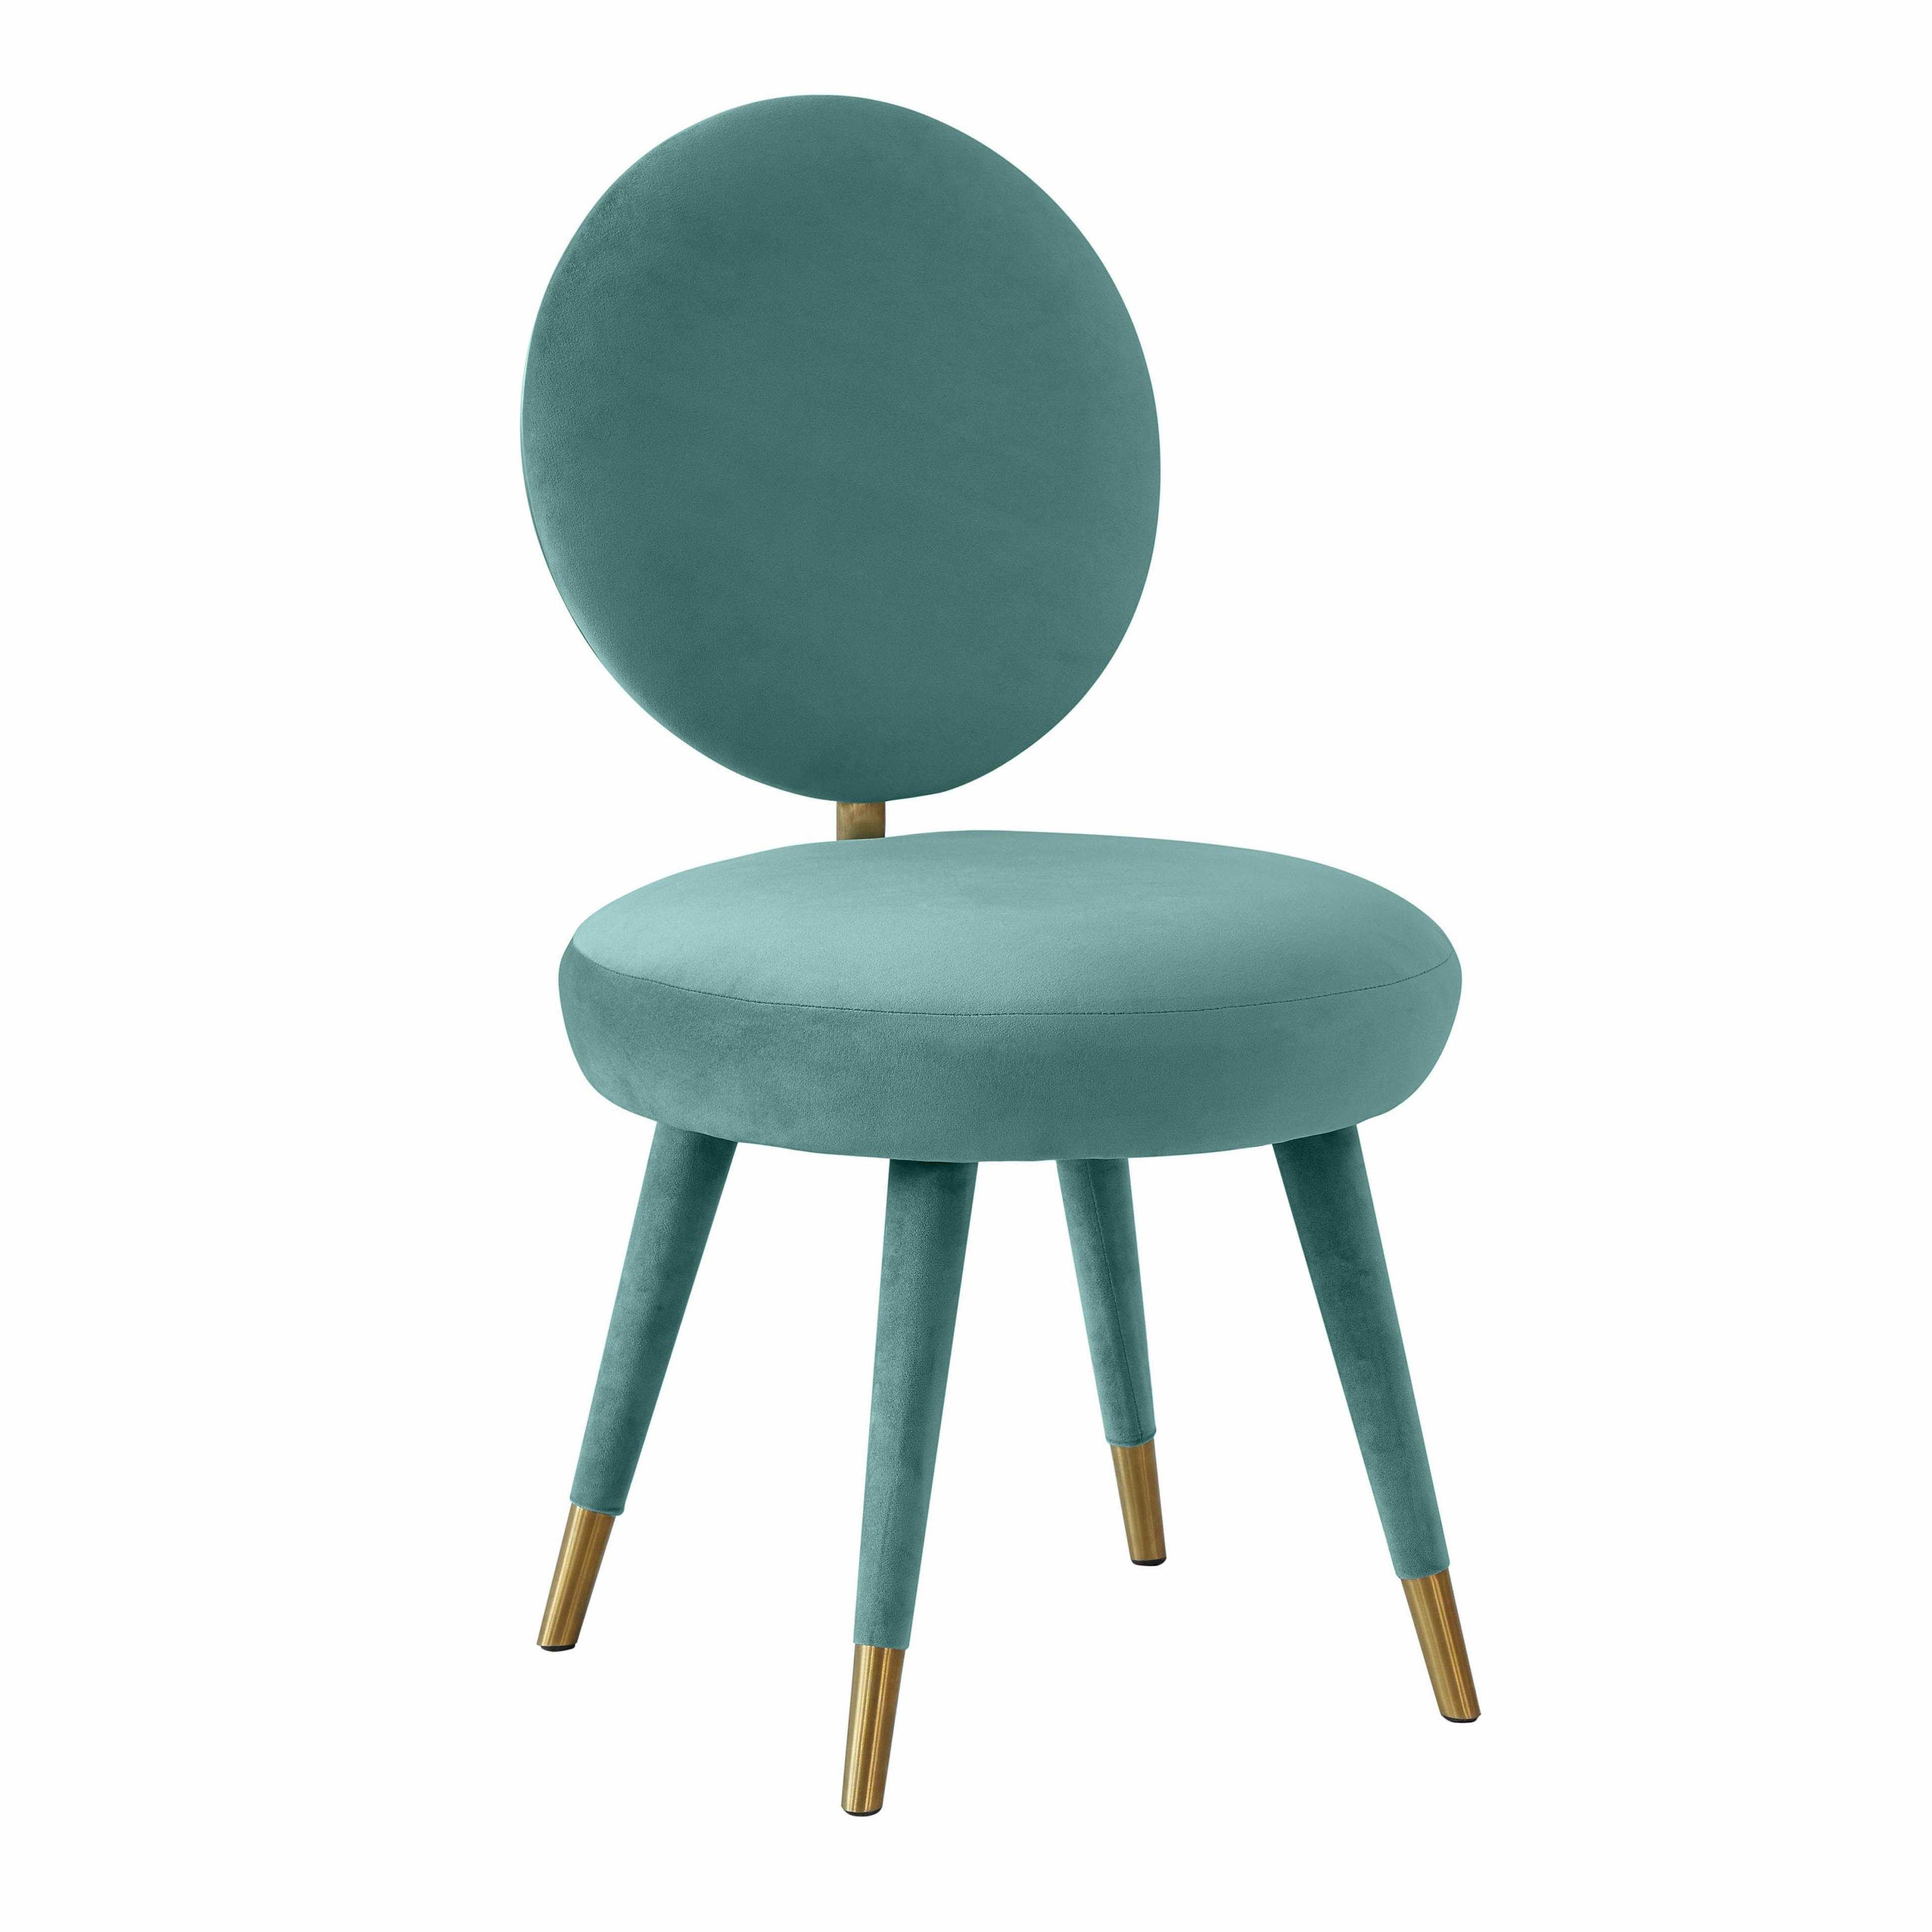 Sea Blue Velvet Upholstered Side Chair with Gold-Tipped Legs